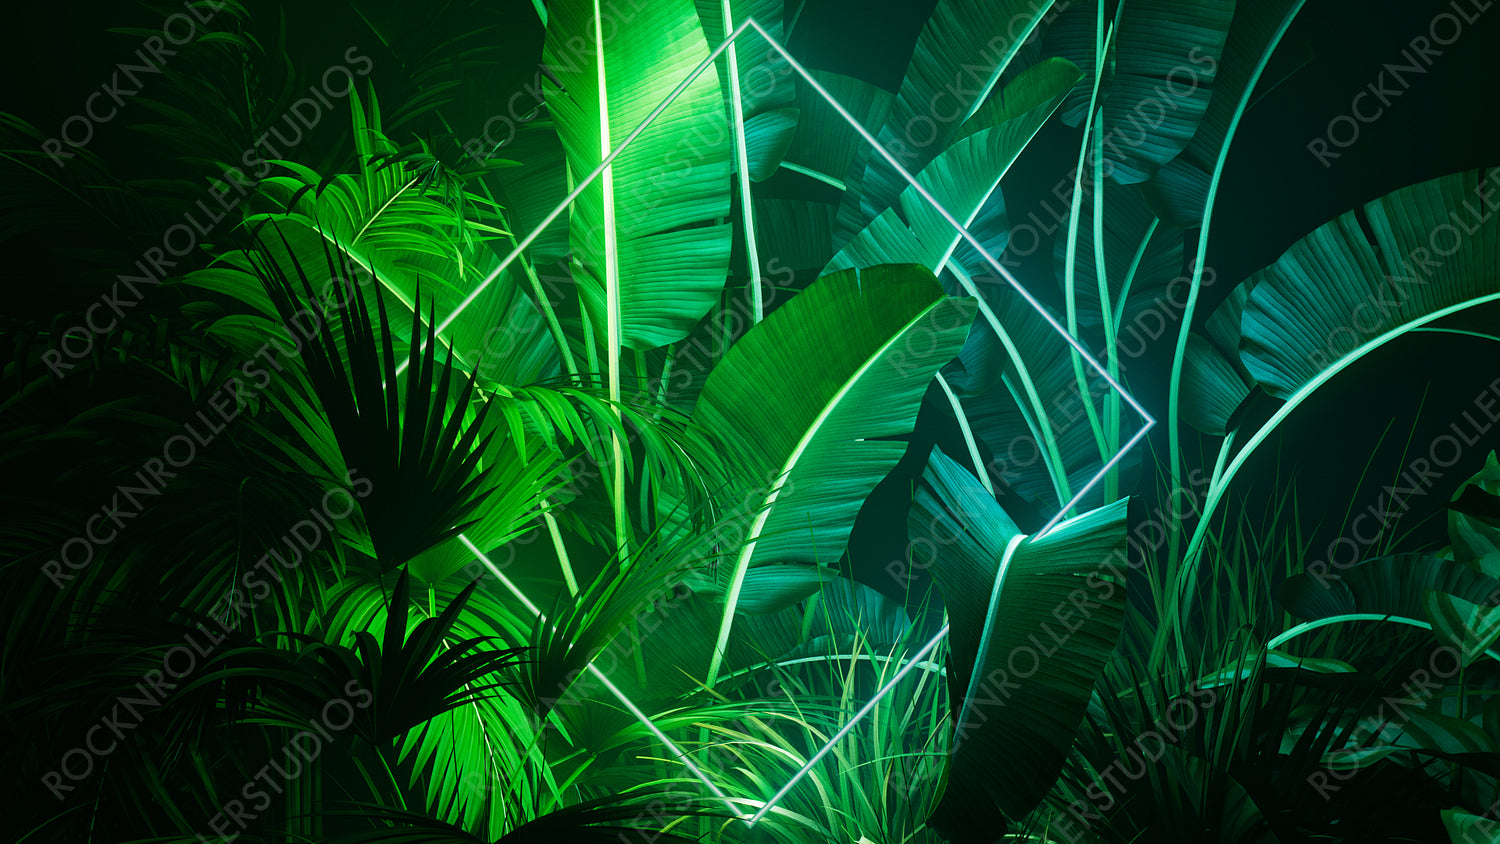 Futuristic Background Design. Tropical Leaves with Green and Blue, Diamond shaped Neon Frame.